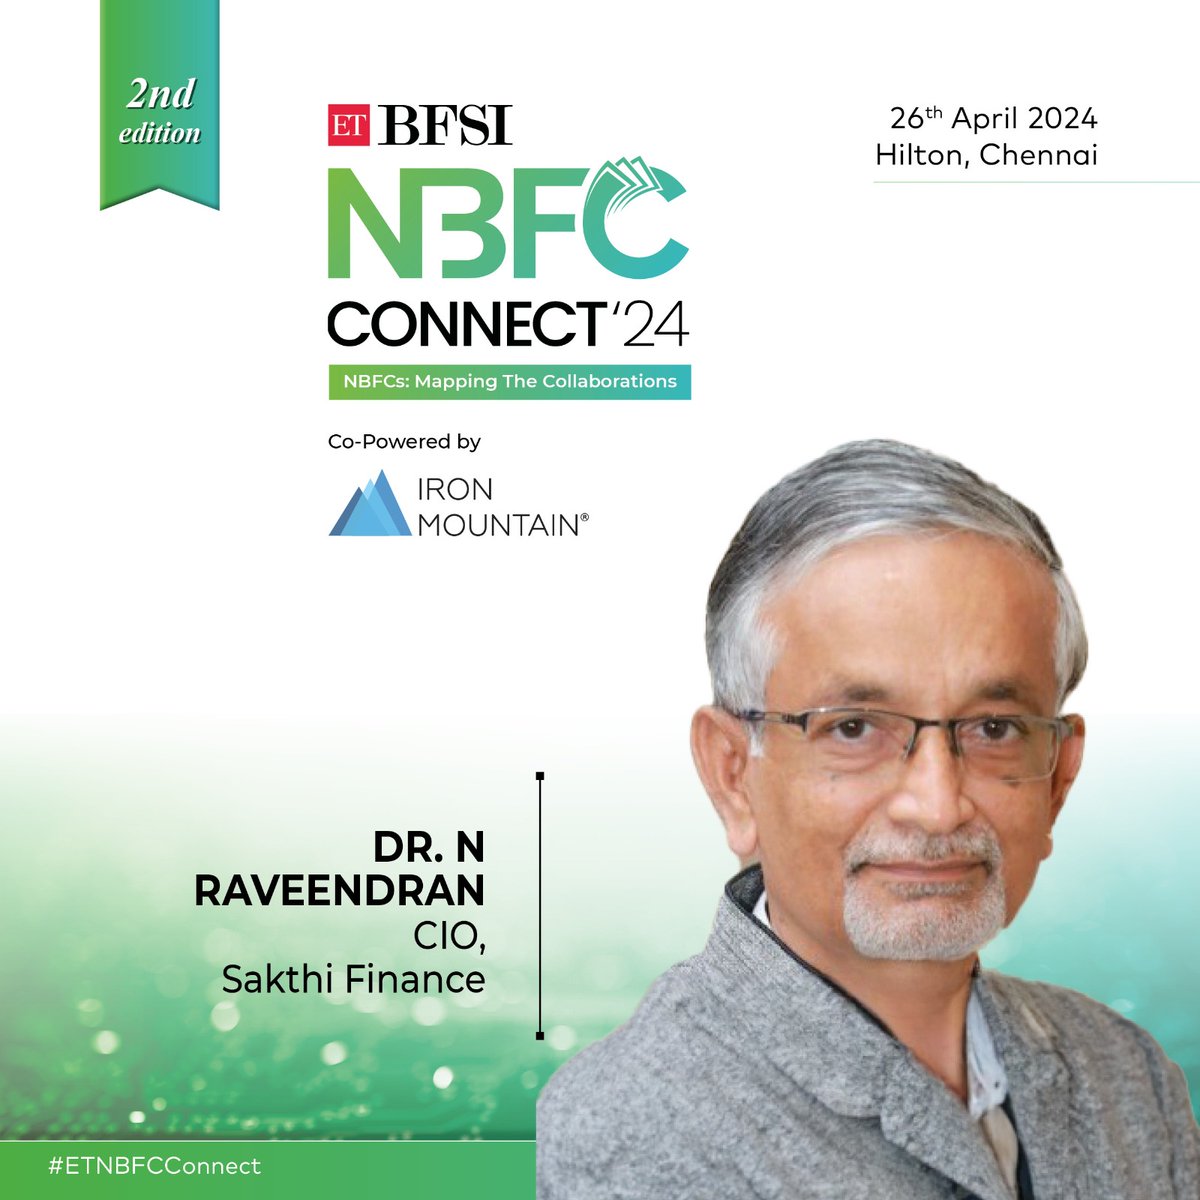 Excited to welcome Dr. N Raveendran, CIO of Sakthi Finance, as one of our esteemed speakers for the ETBFSI NBFC Connect 2024 in Chennai on April 26th! Know more- zurl.co/Dlnb #ETBFSI #ETNBFCConnect #Chennai2024 #BFSIEvent #FinanceInnovation #Finance #NBFCs